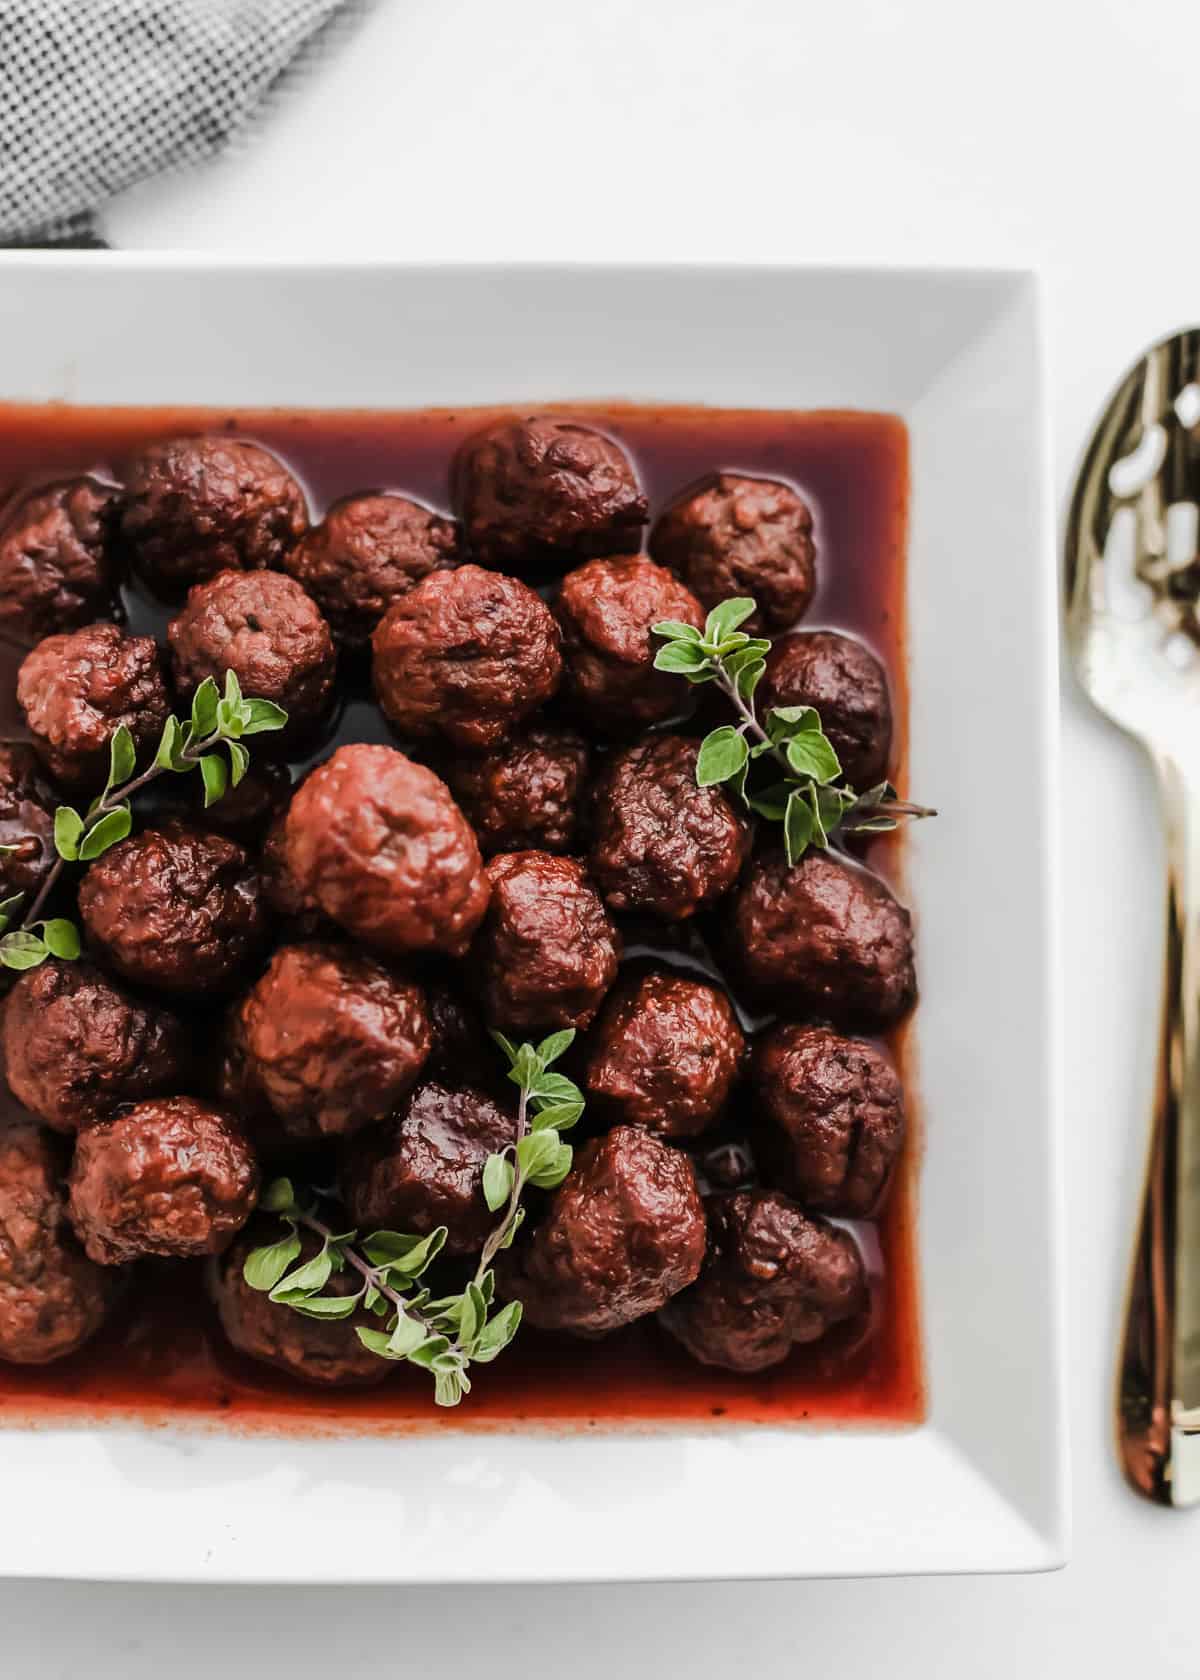 saucy meatballs appetizers piled in a white square dish garnished with herbs, overhead.